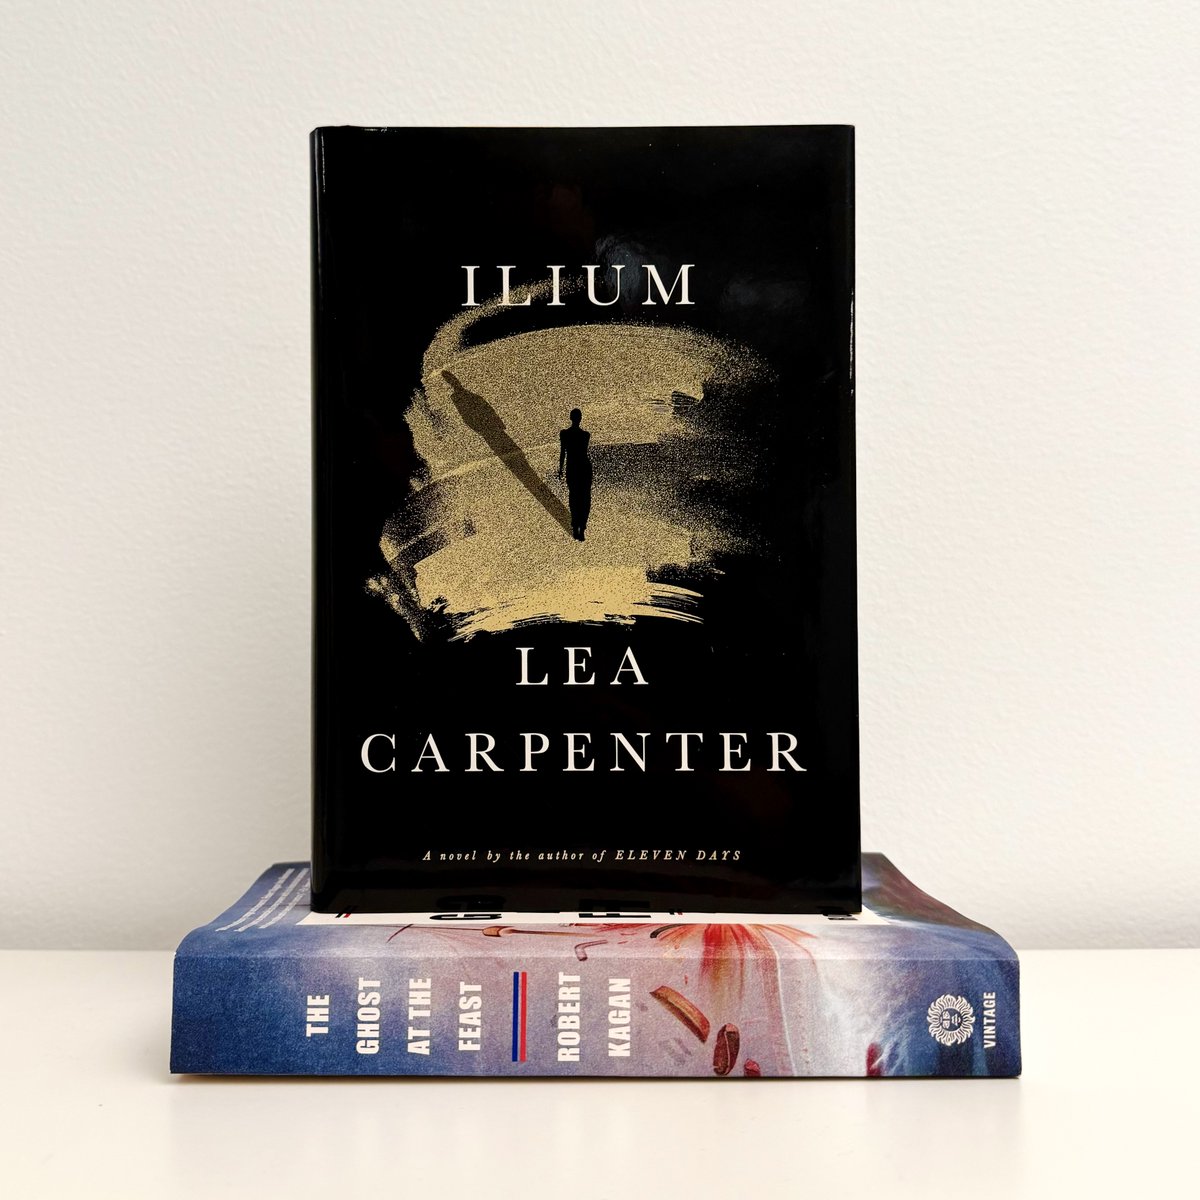 On sale today: 🕵️‍♀️ ILIUM by Lea Carpenter And now available in paperback: 💥 THE GHOST AT THE FEAST by Robert Kagan